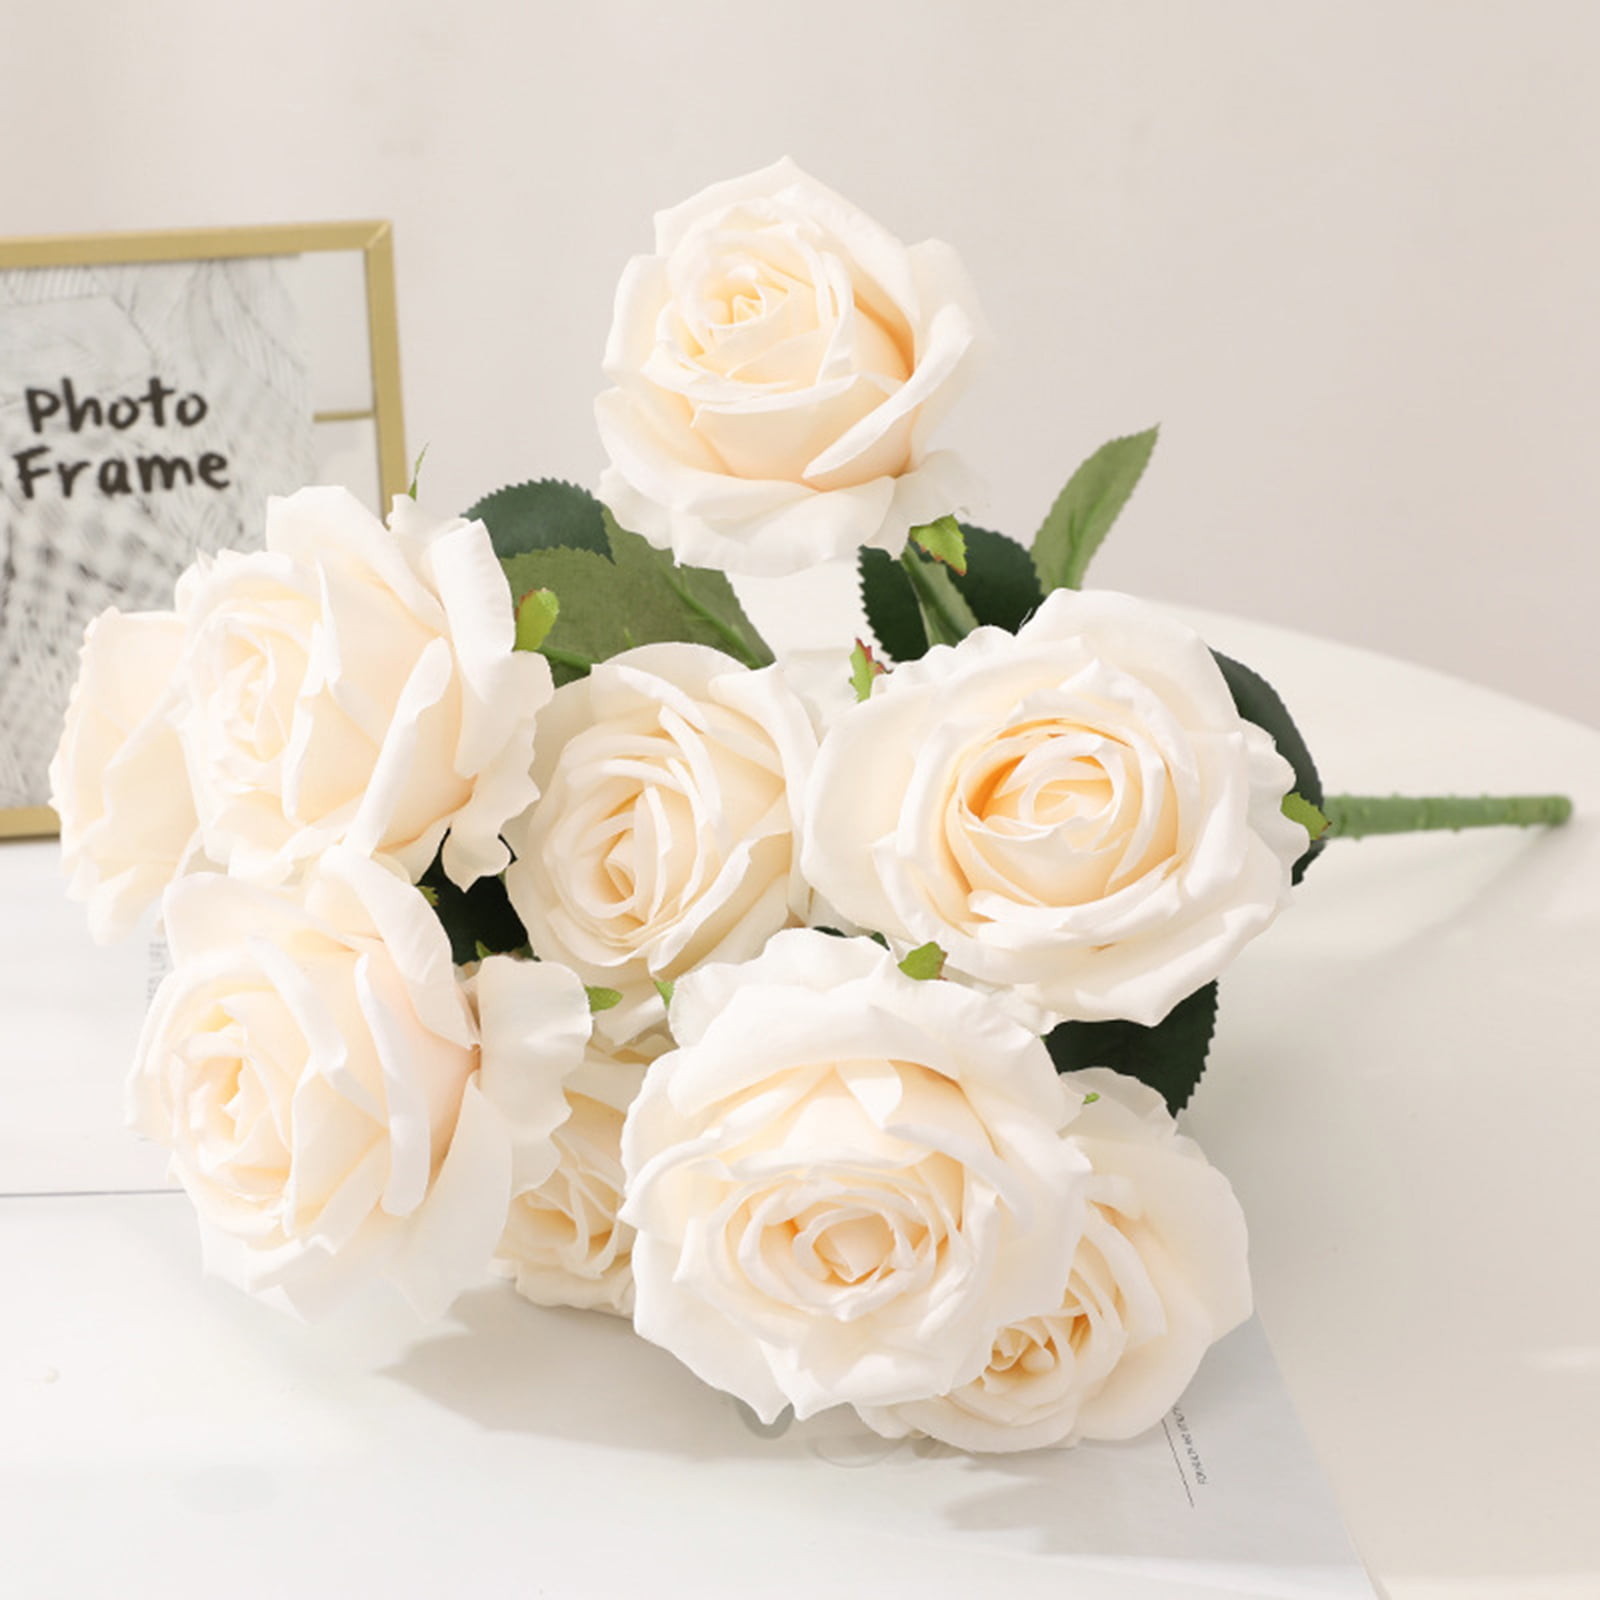 6 Ivory High Quality Silk Roses Flowers Bouquet Wedding Home Party Decor 